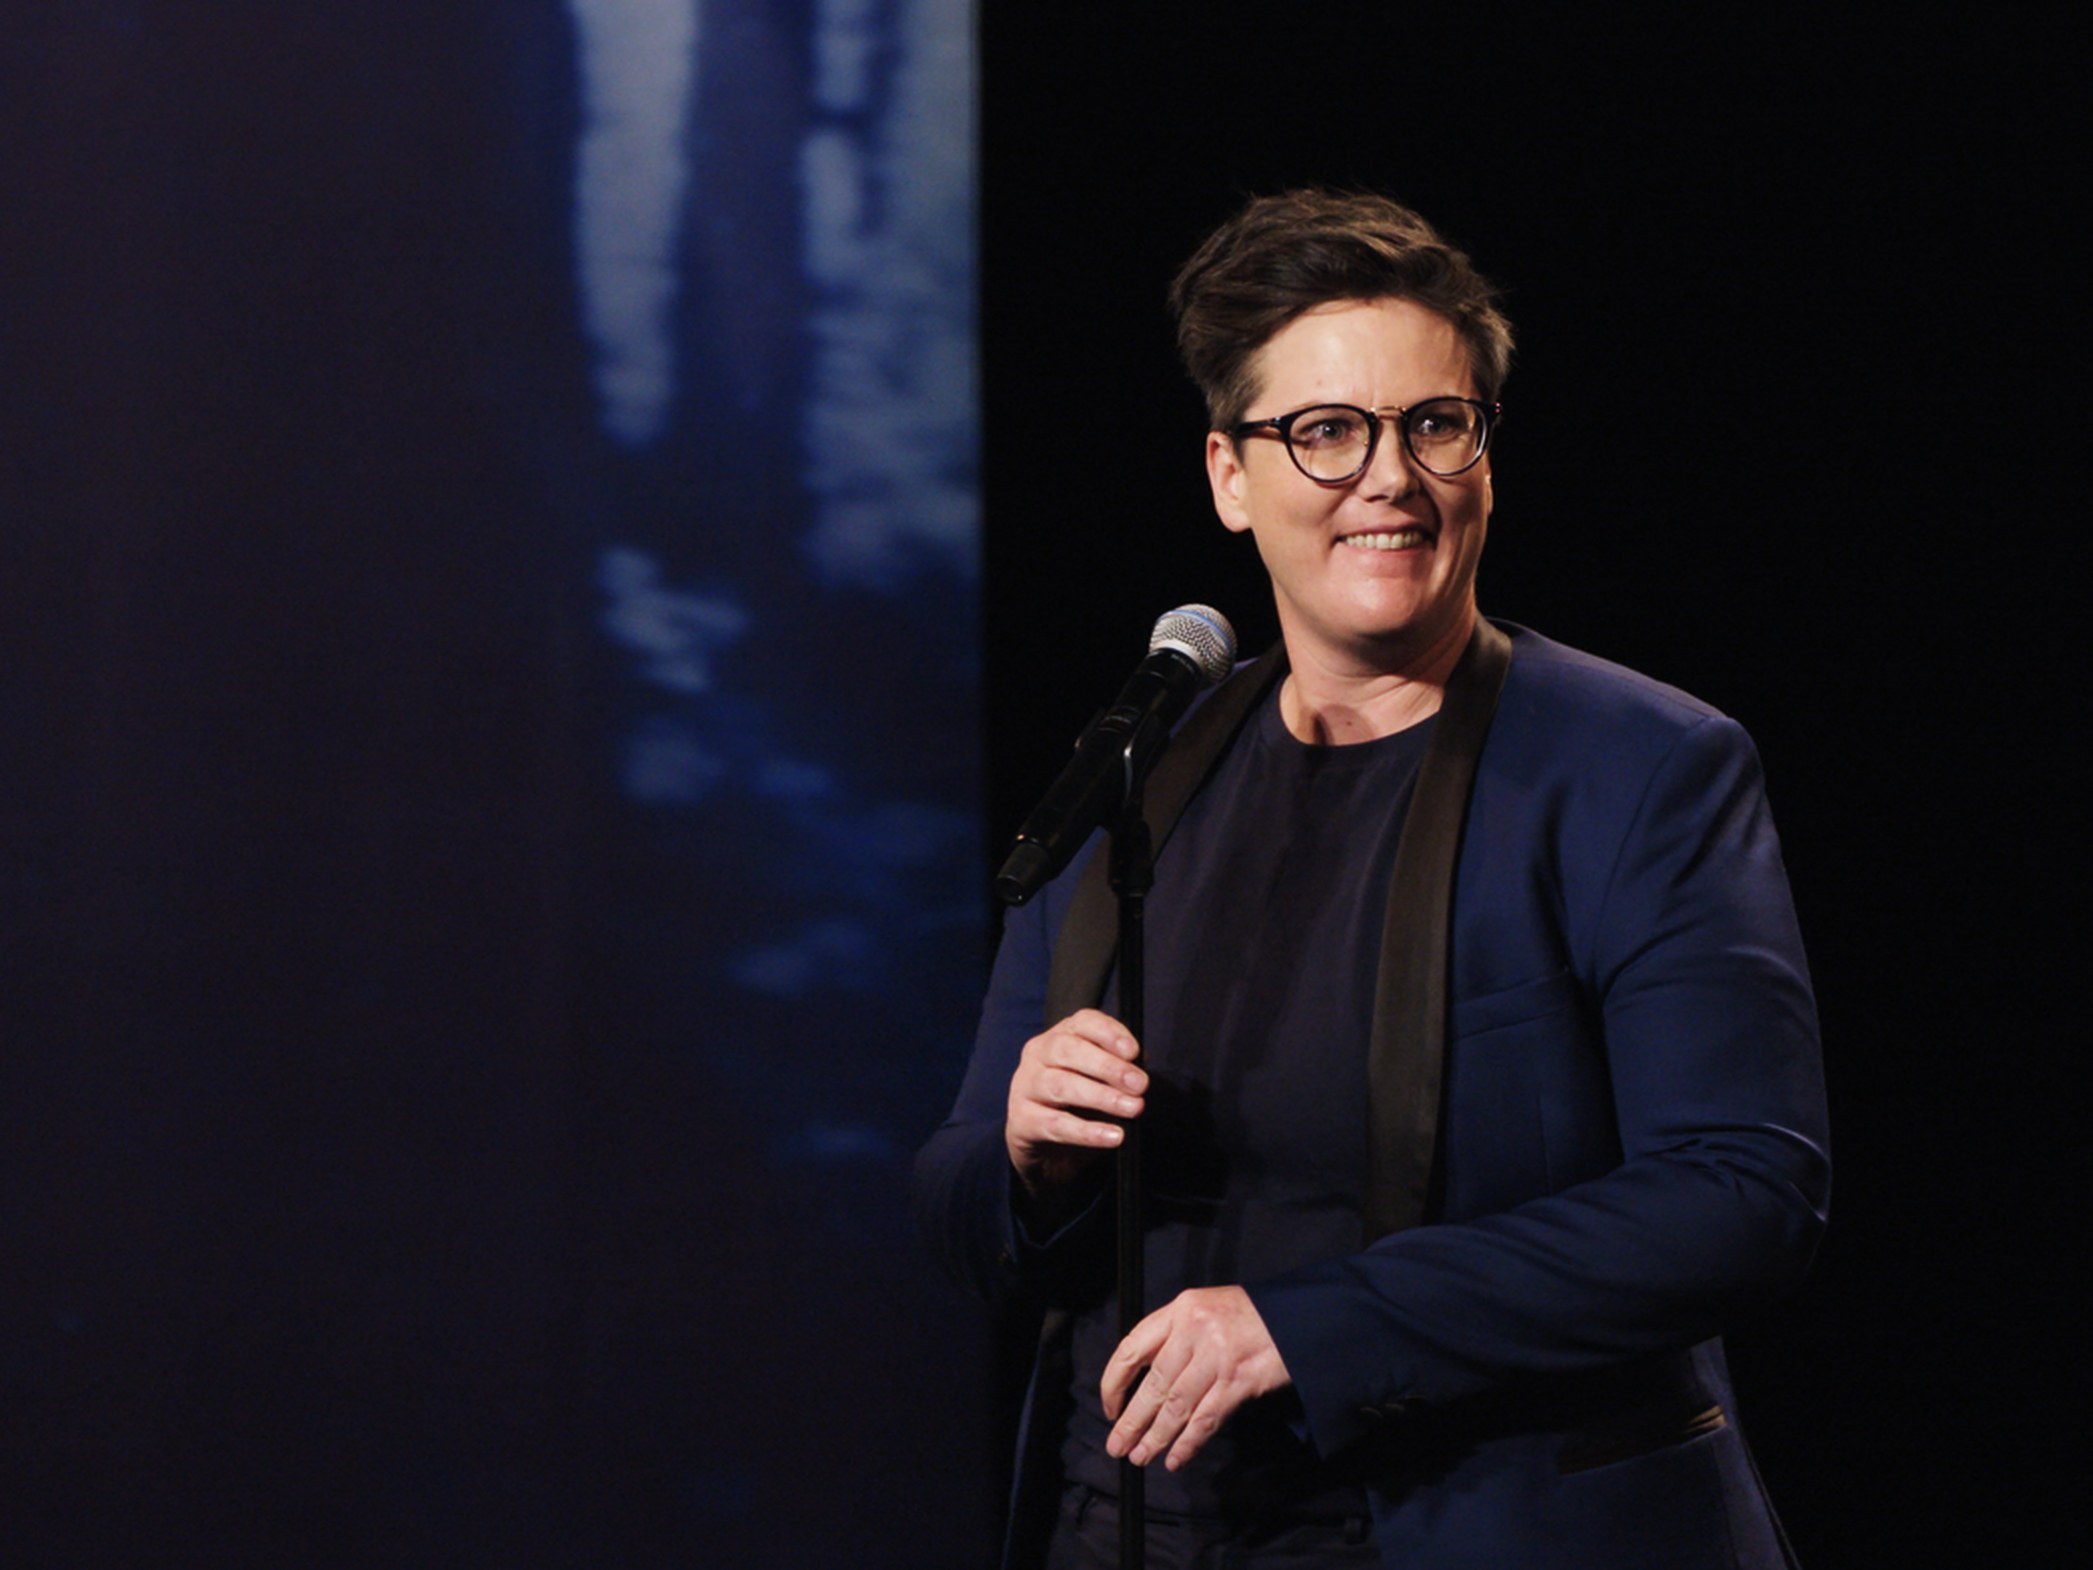 Hannah Gadsby is rumoured to be the next Oscars host